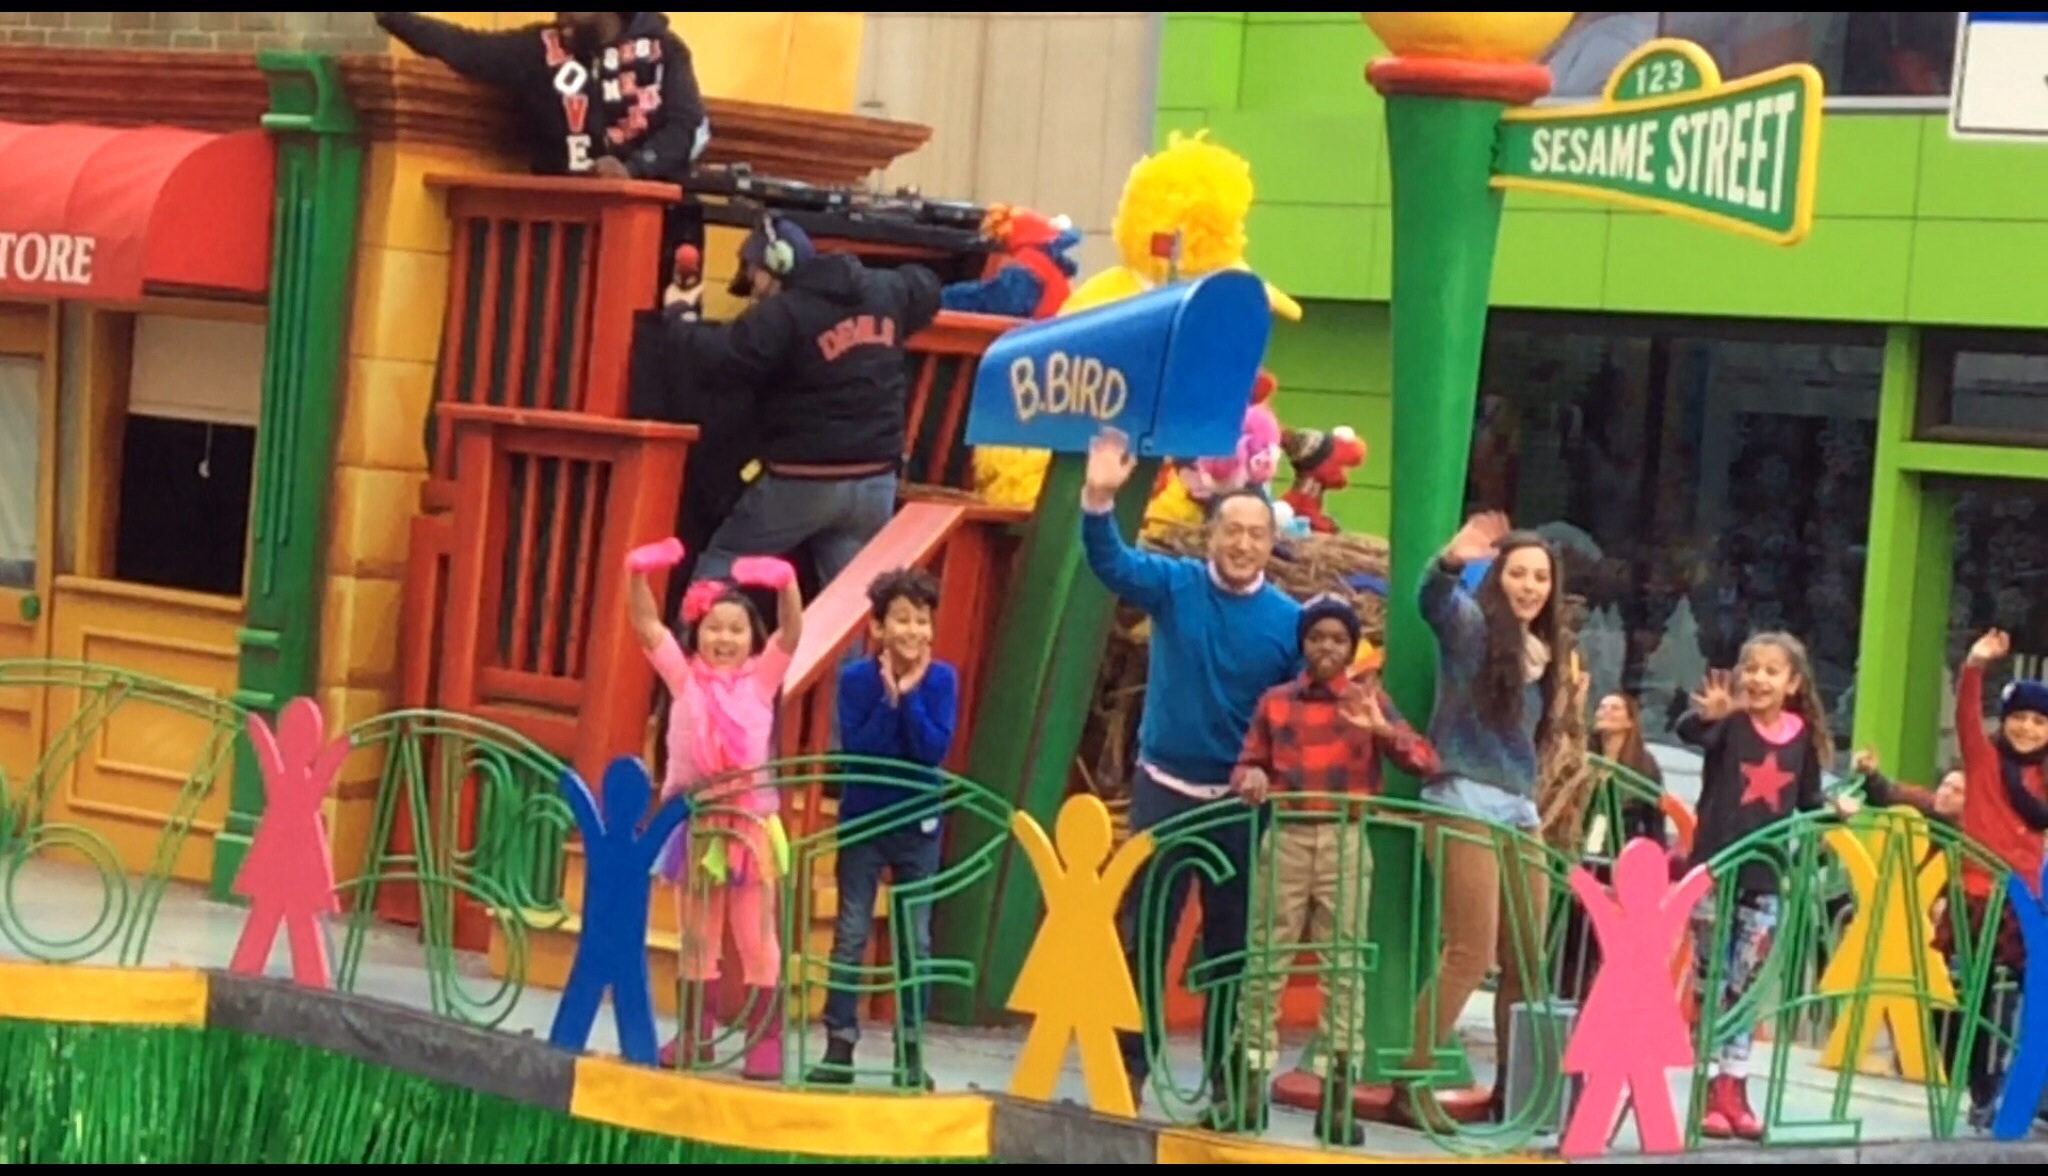 RAINA CHENG & the Sesame Street gang just finished performing on the Sesame Street Float at the 89th Macy's Thanksgiving Day Parade, 11/26/2015